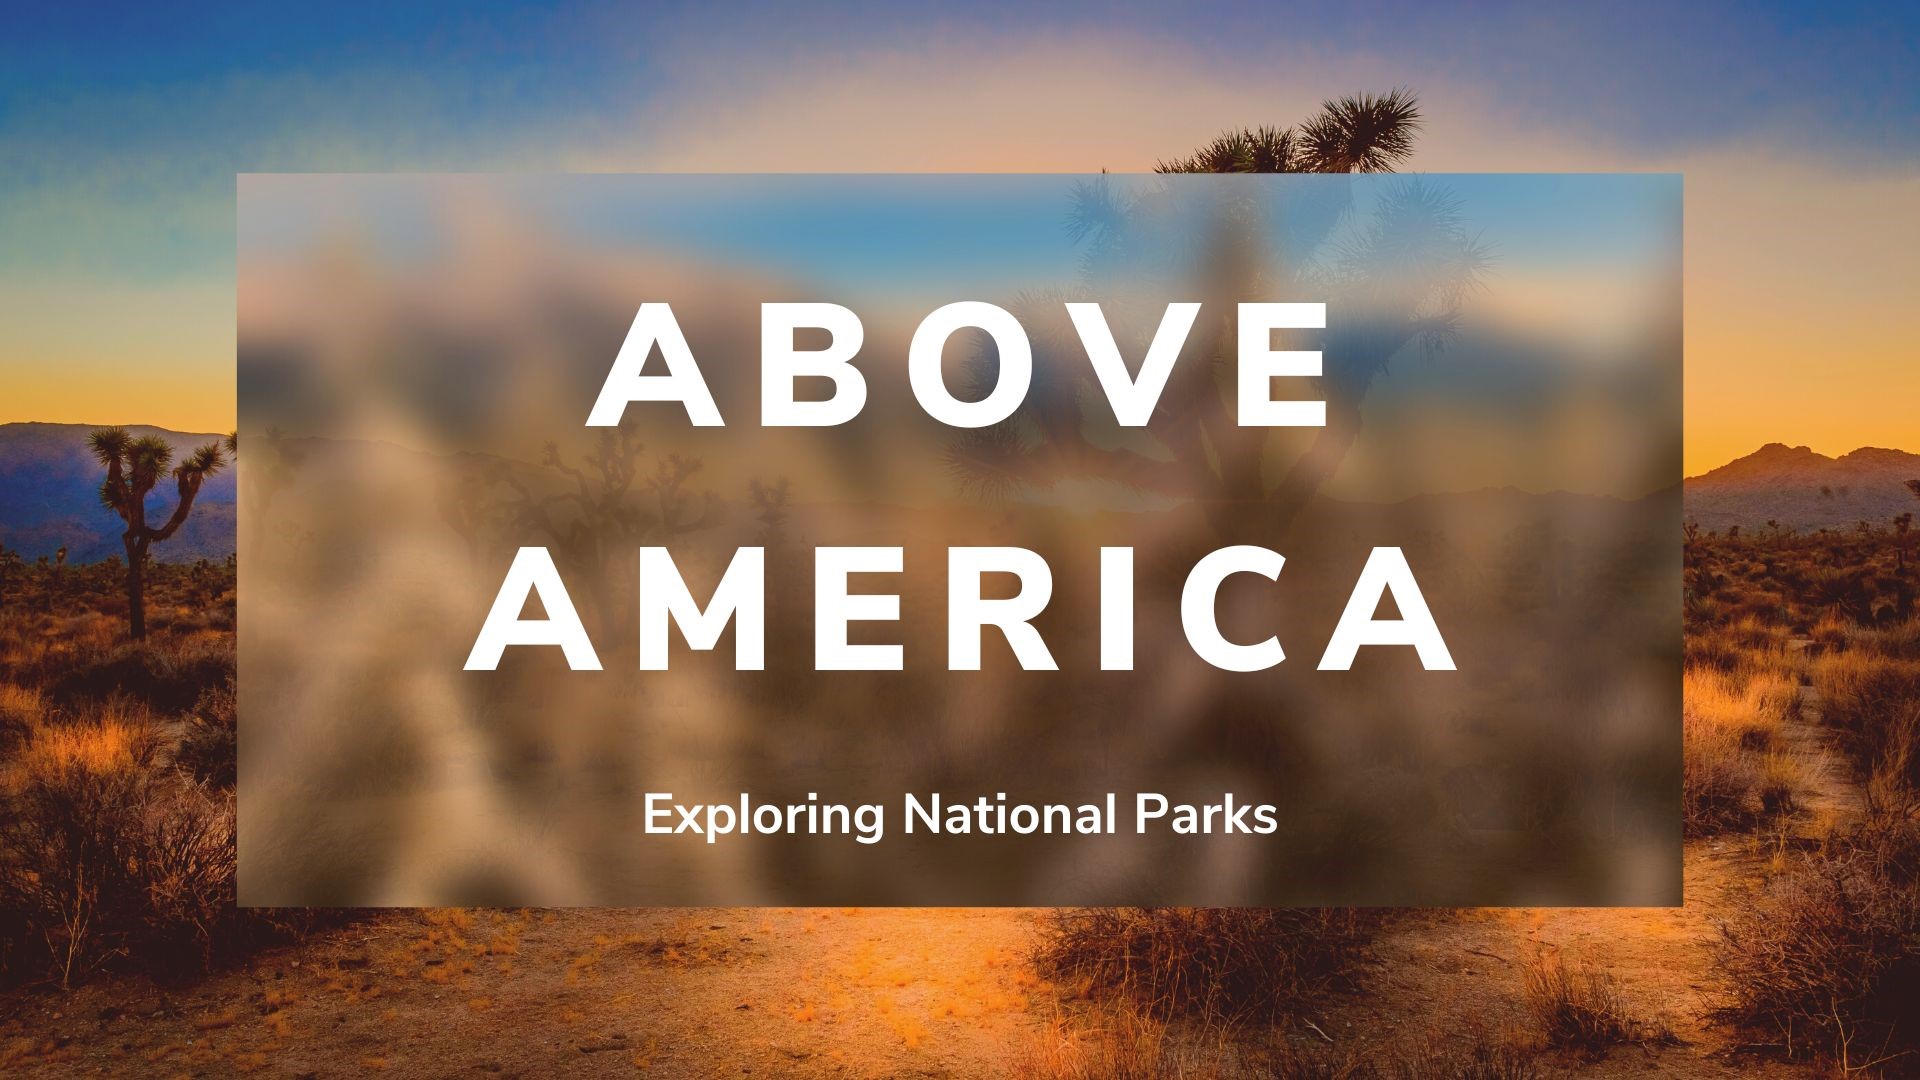 A view of national parks across the United States. Get a closer look at parks such as Joshua Tree and Yosemite.